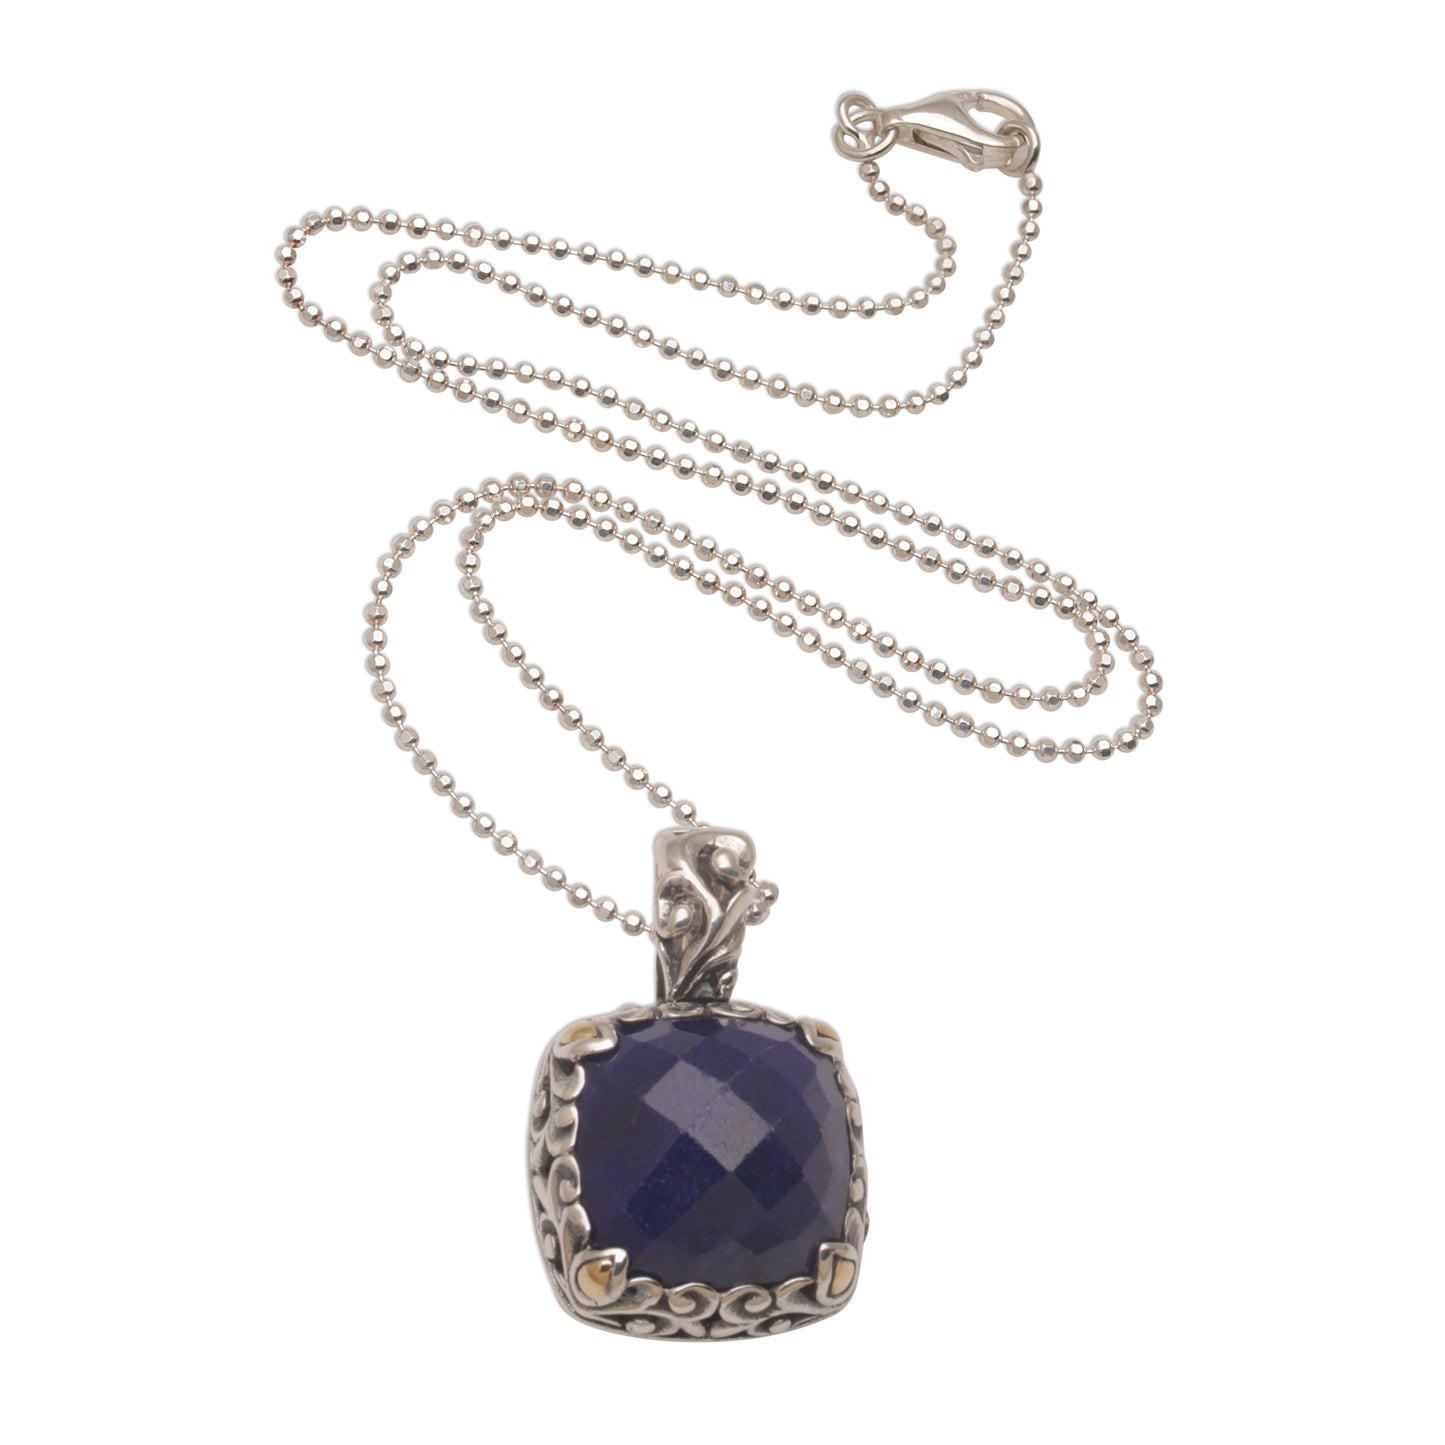 Majestic Eden Sapphire and Gold Accented Sterling Silver Pendant Necklace